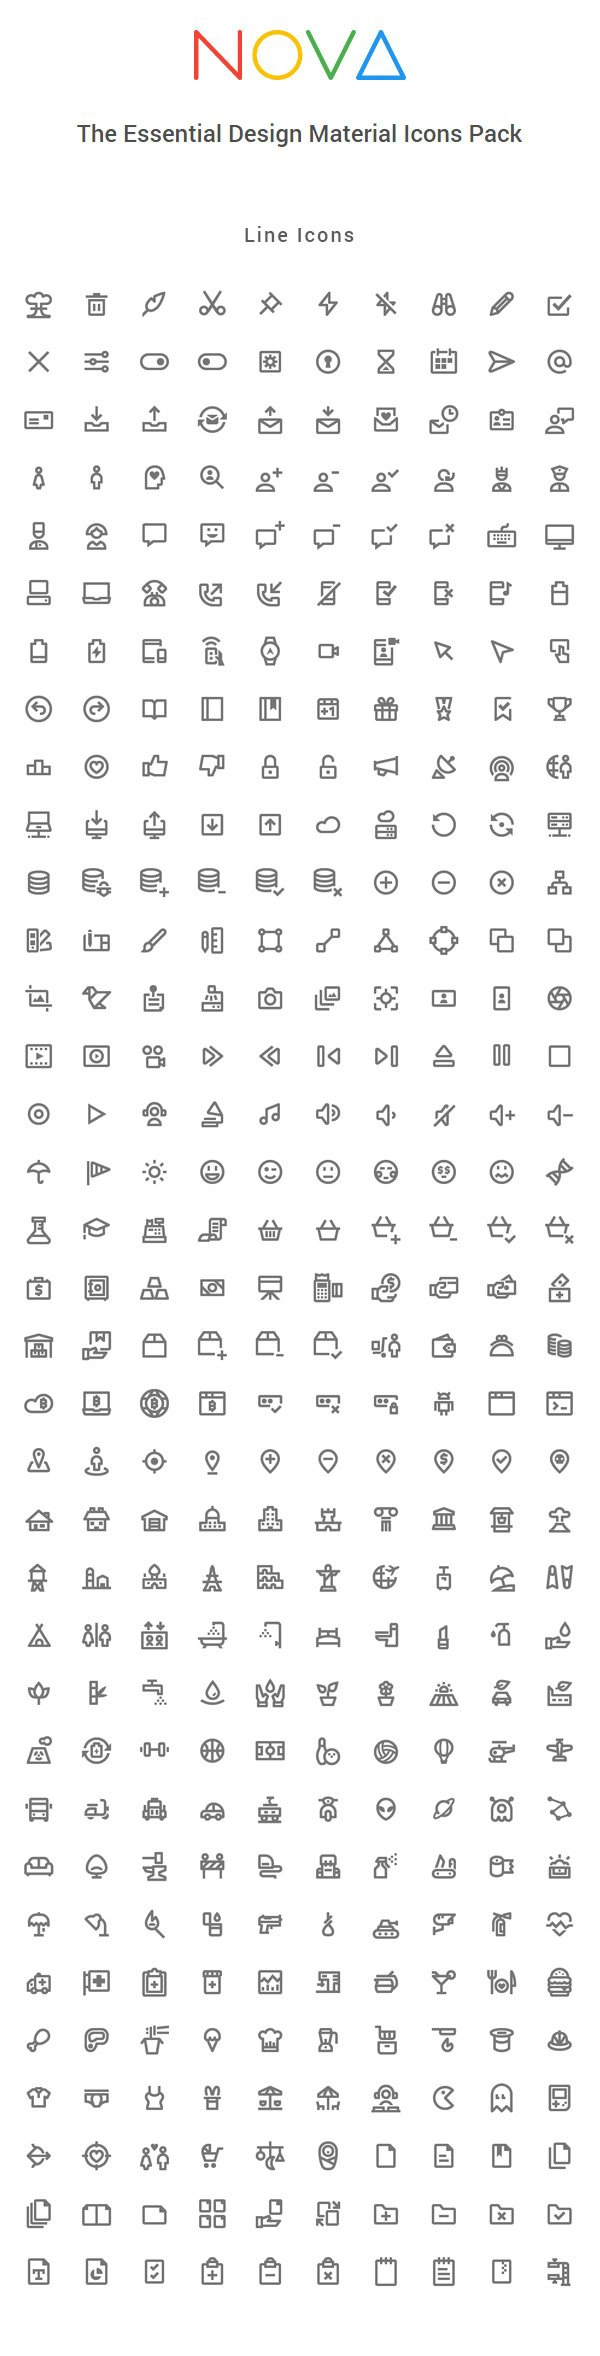 Nova: 350 Material Style Icons